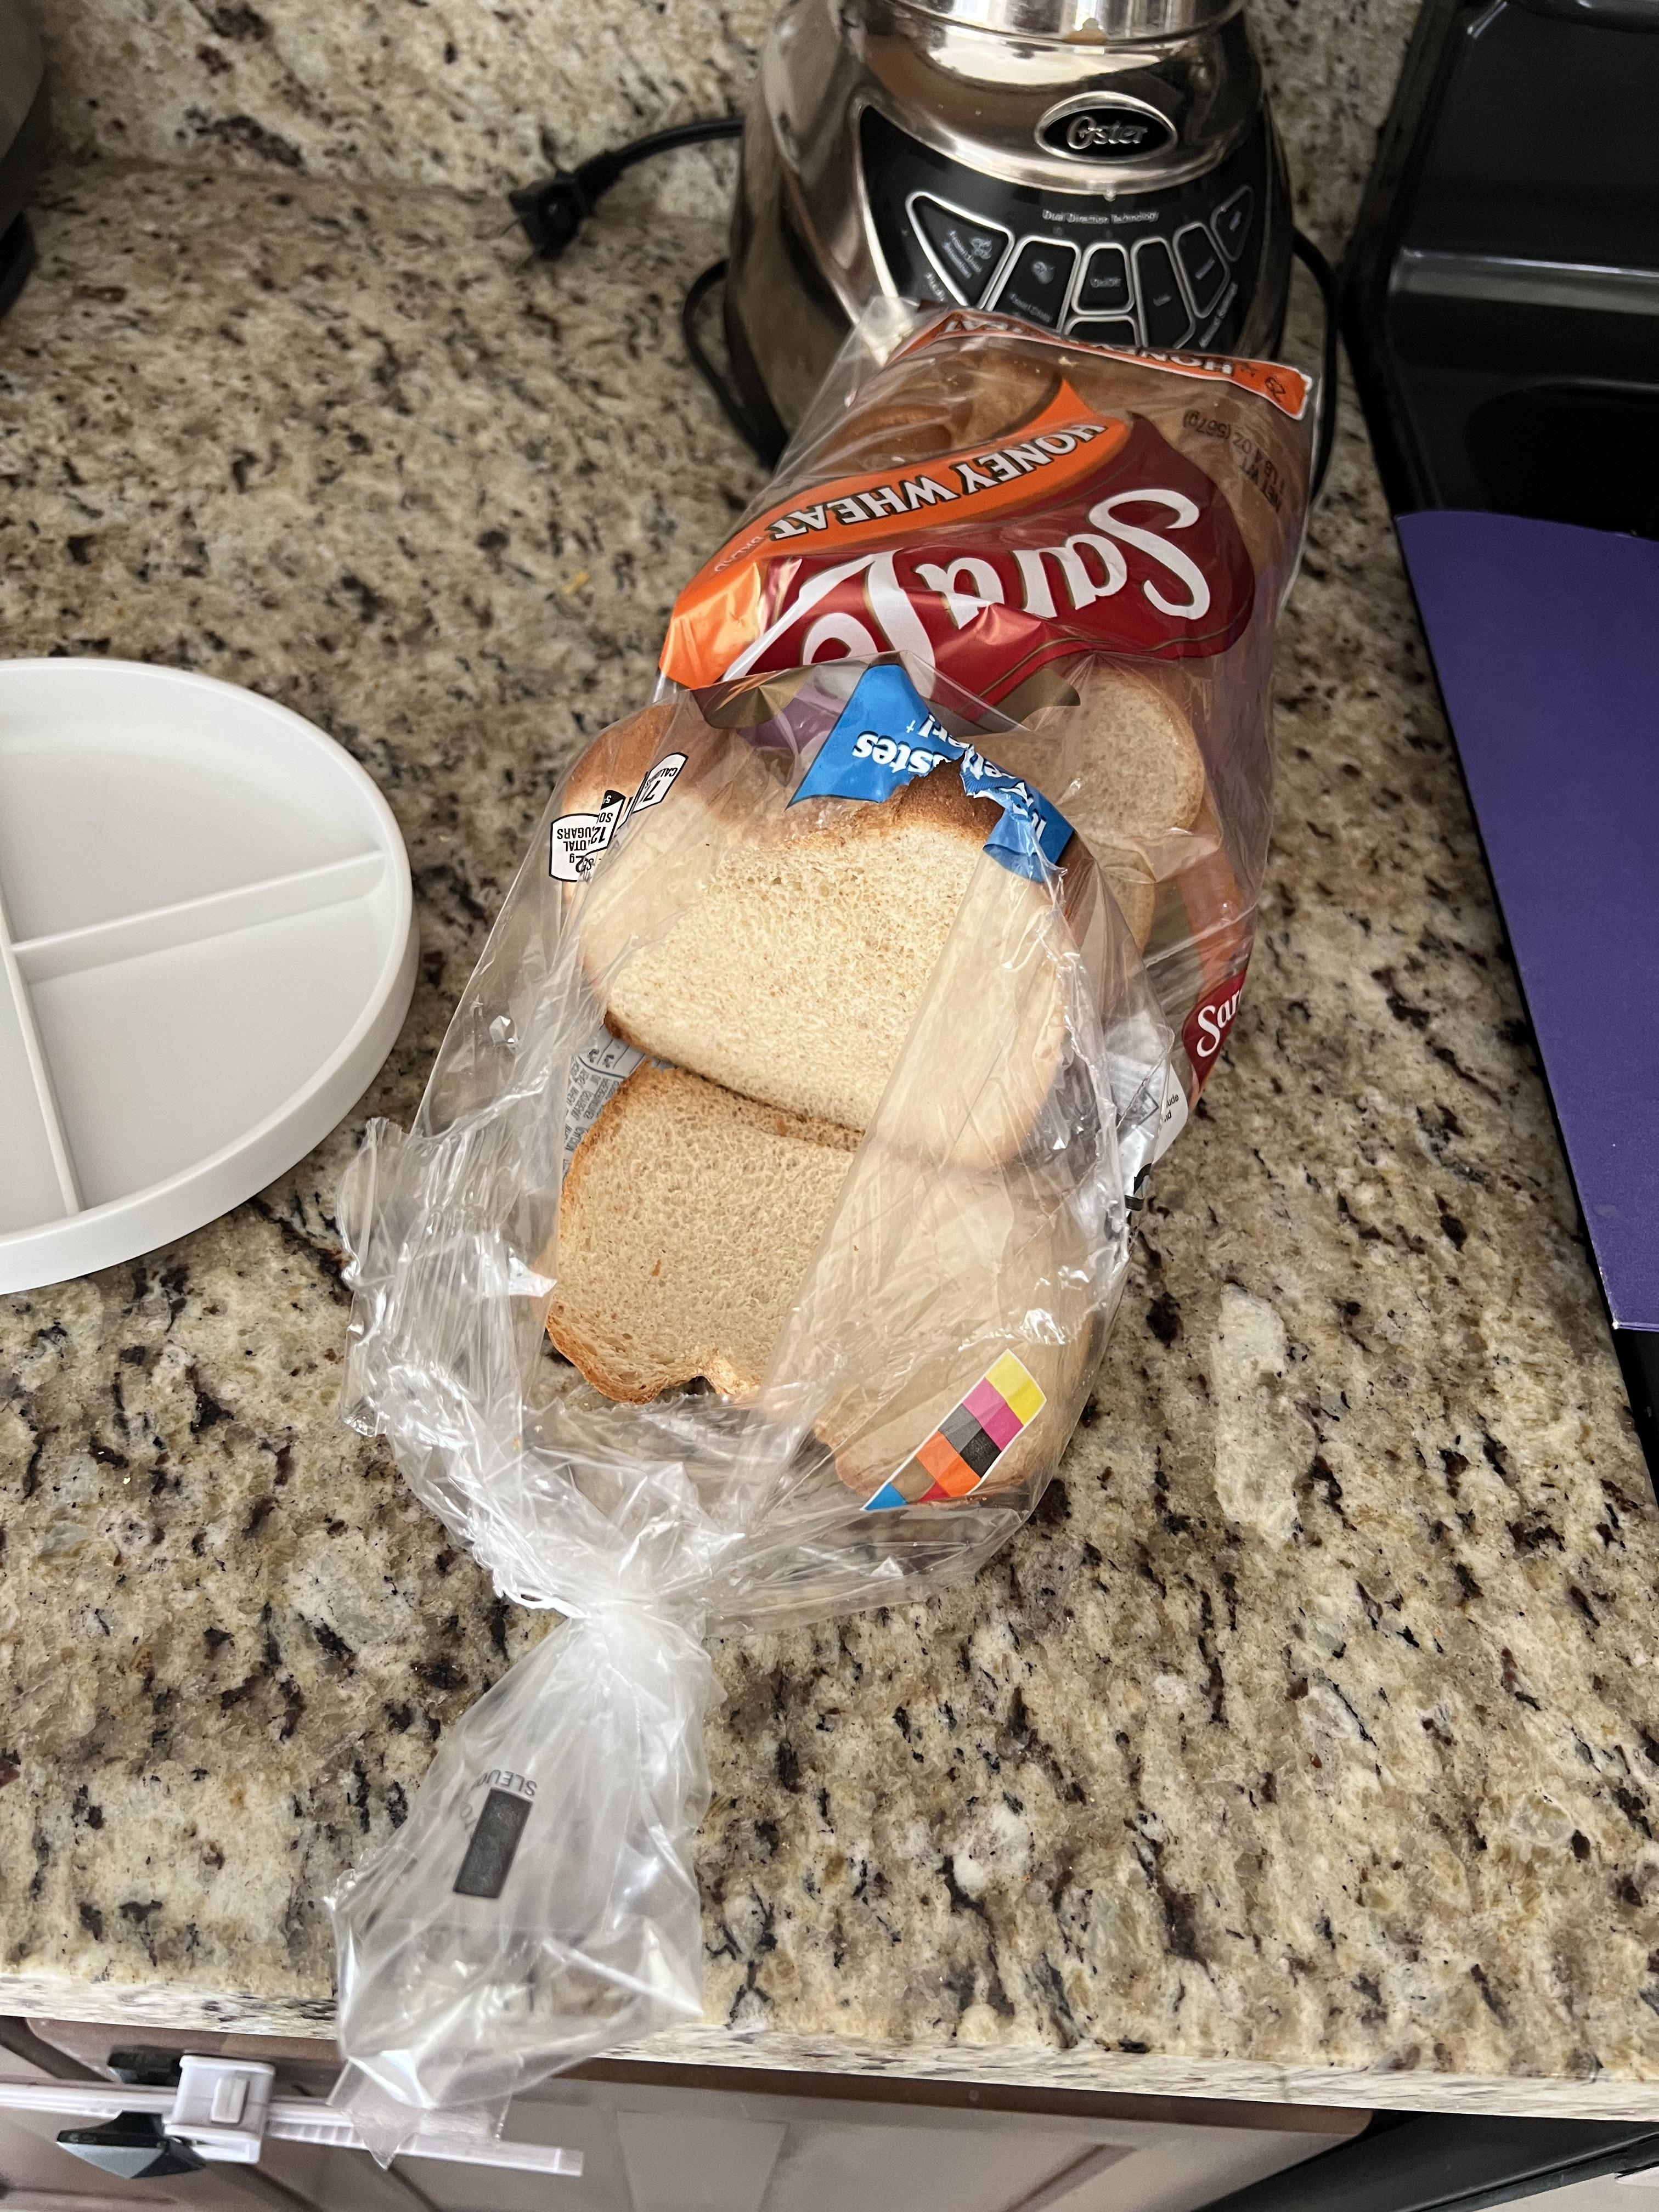 A loaf of bread partially out of its bag on a kitchen counter beside a toaster